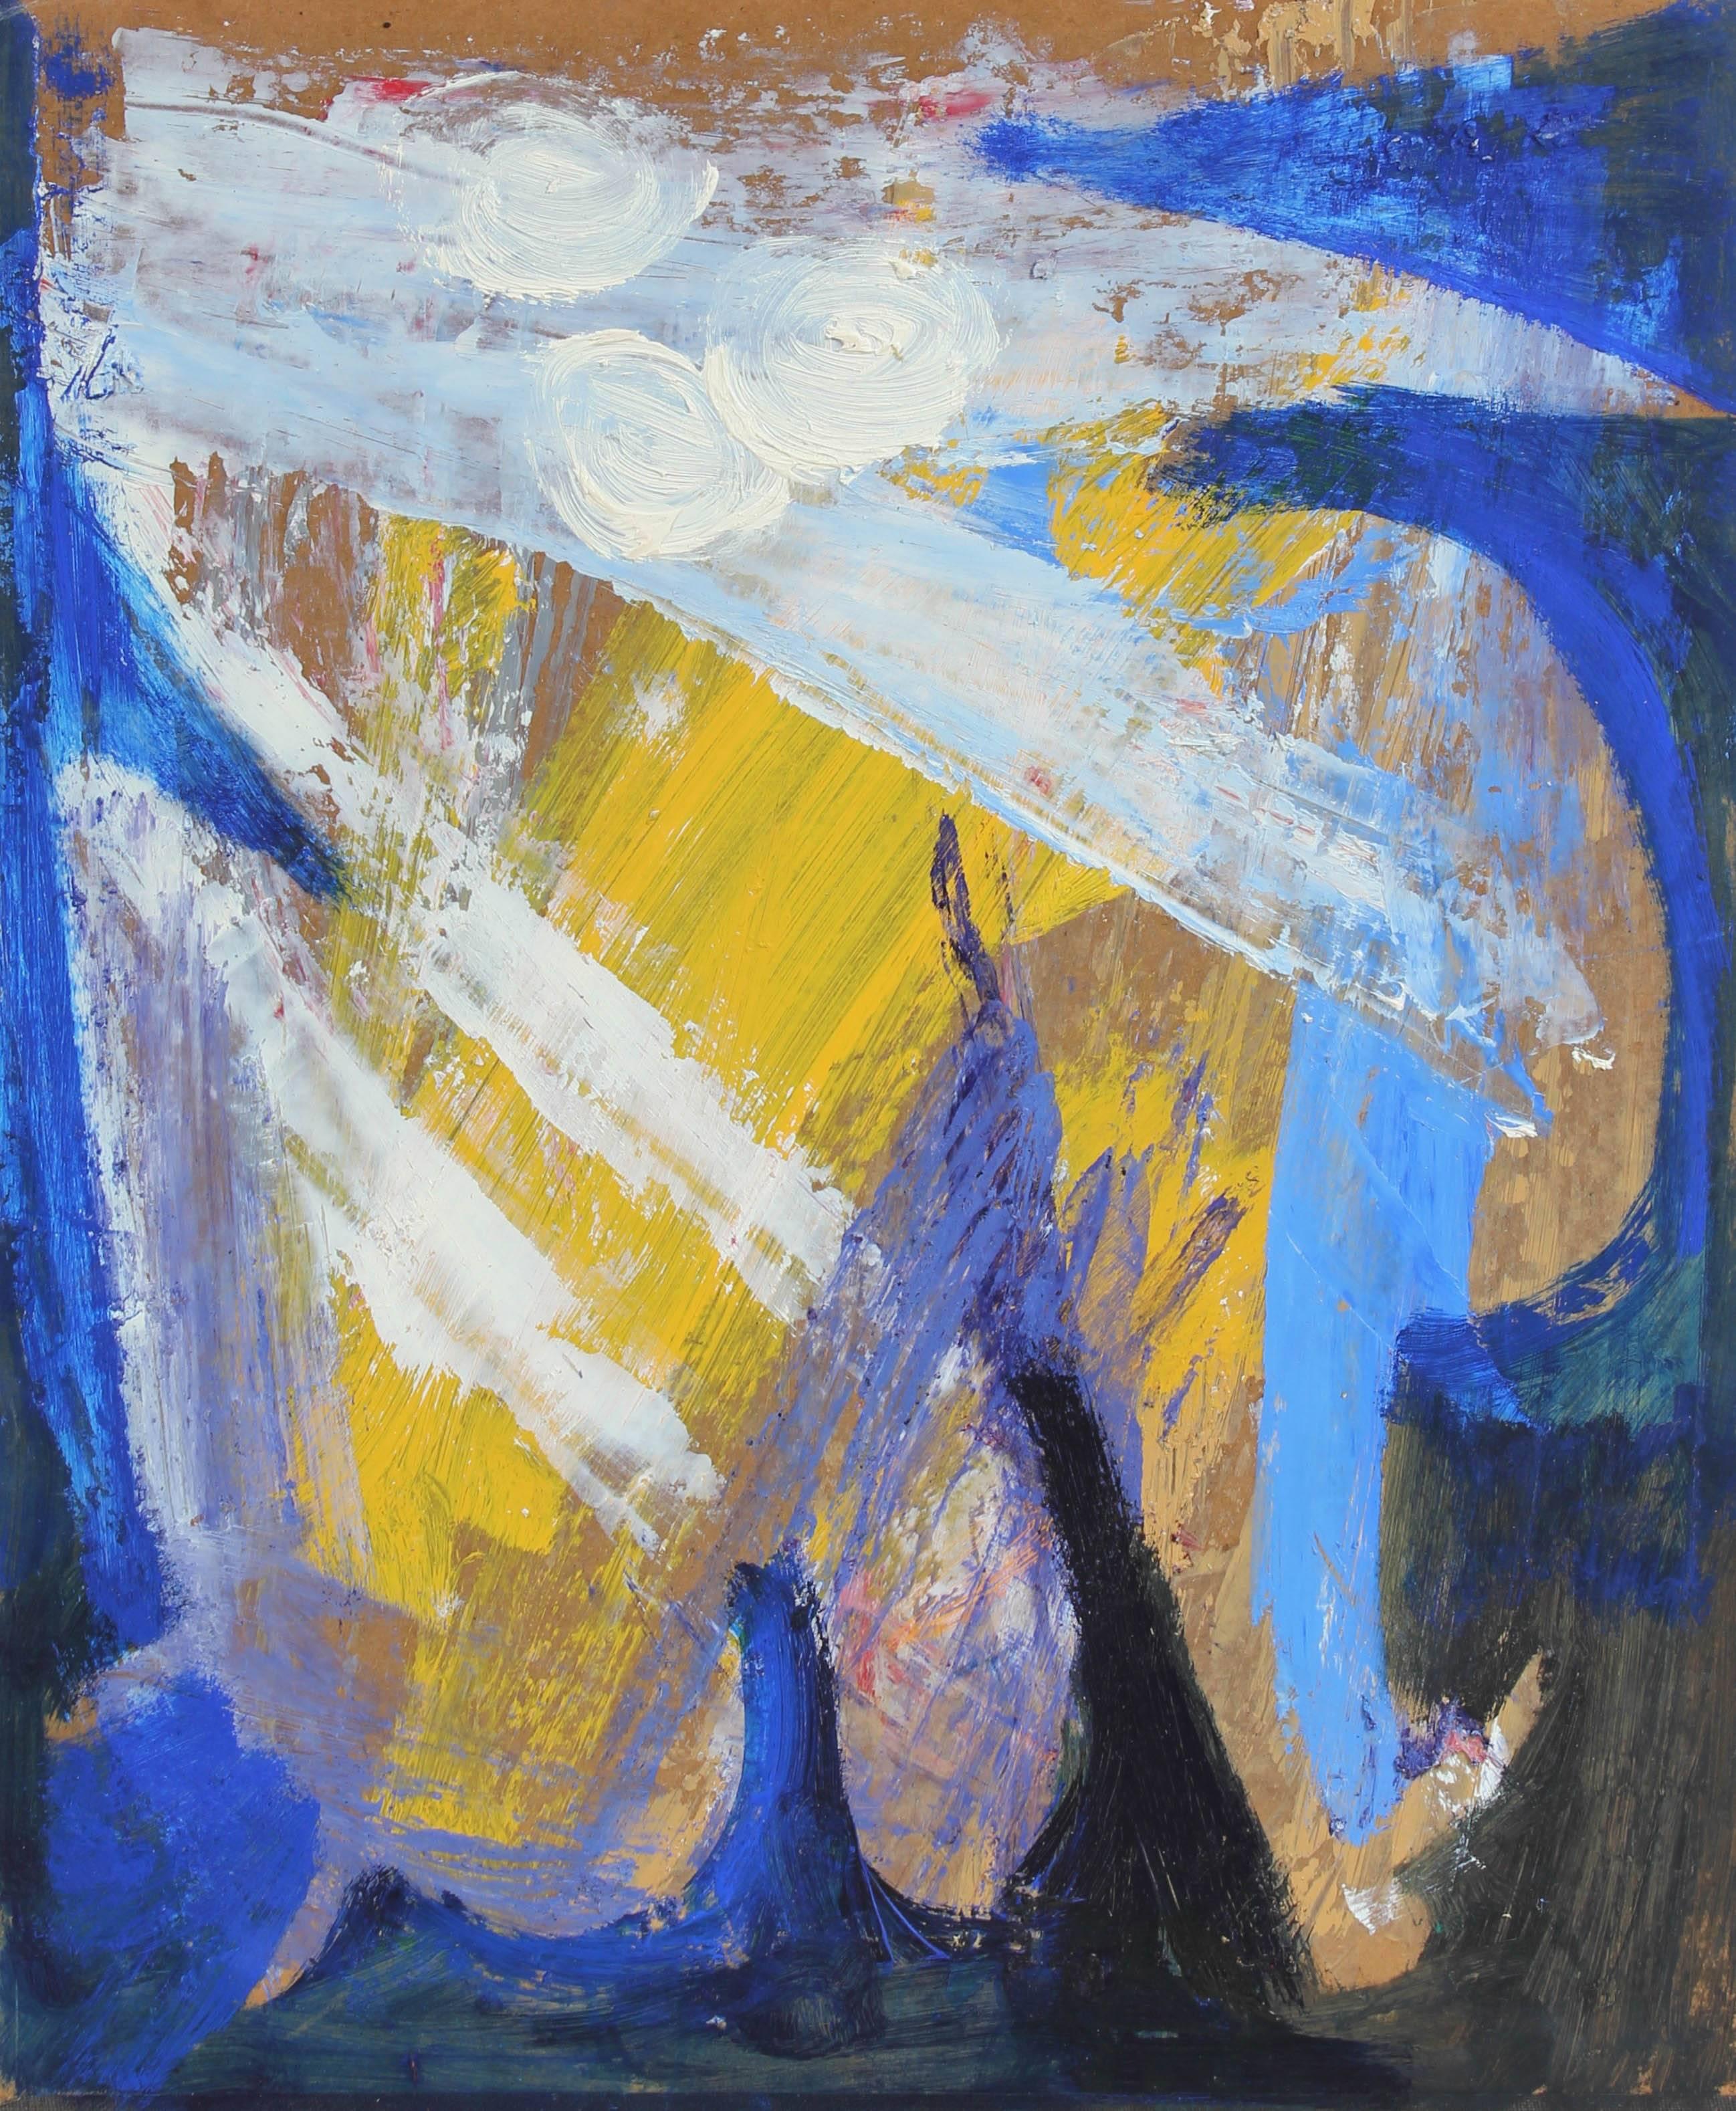 Calvin Anderson Abstract Painting - Bauhaus Modernist Abstract in Blue Yellow & White, Oil Painting, Late 1950s